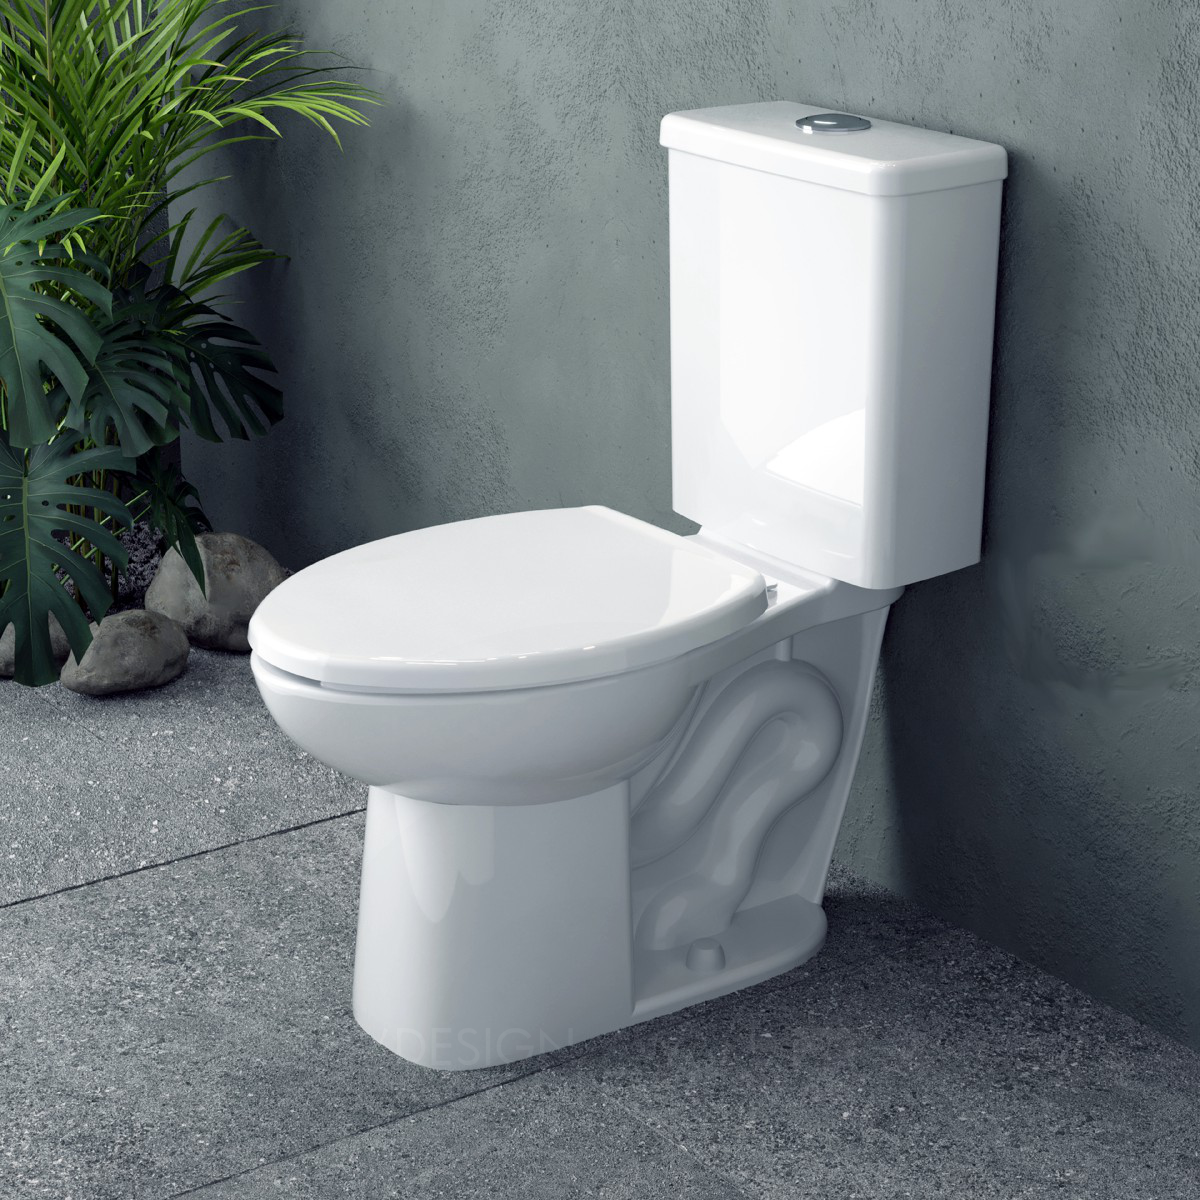 Helvex S.A. de C.V. - Manuel Martínez wins Silver at the prestigious A' Sustainable Products, Projects and Green Design Award with Sustenta Bathroom Toilet.